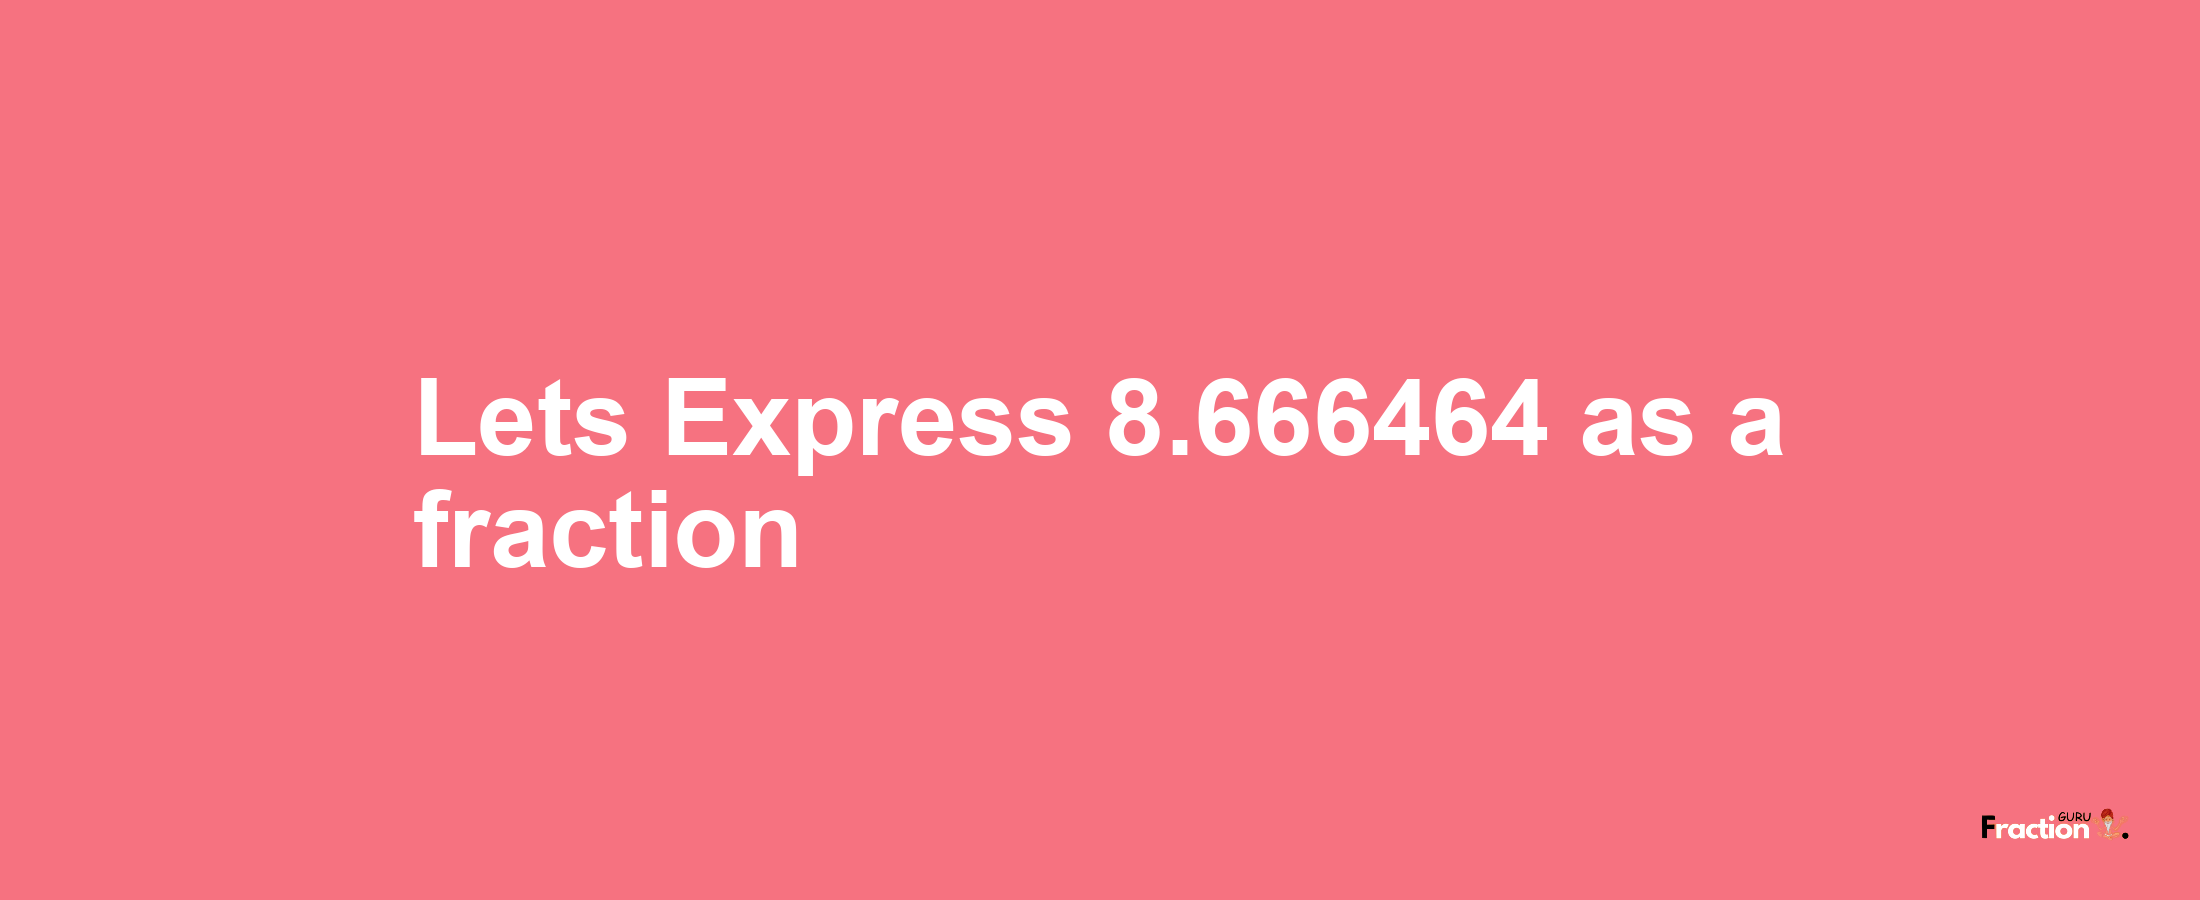 Lets Express 8.666464 as afraction